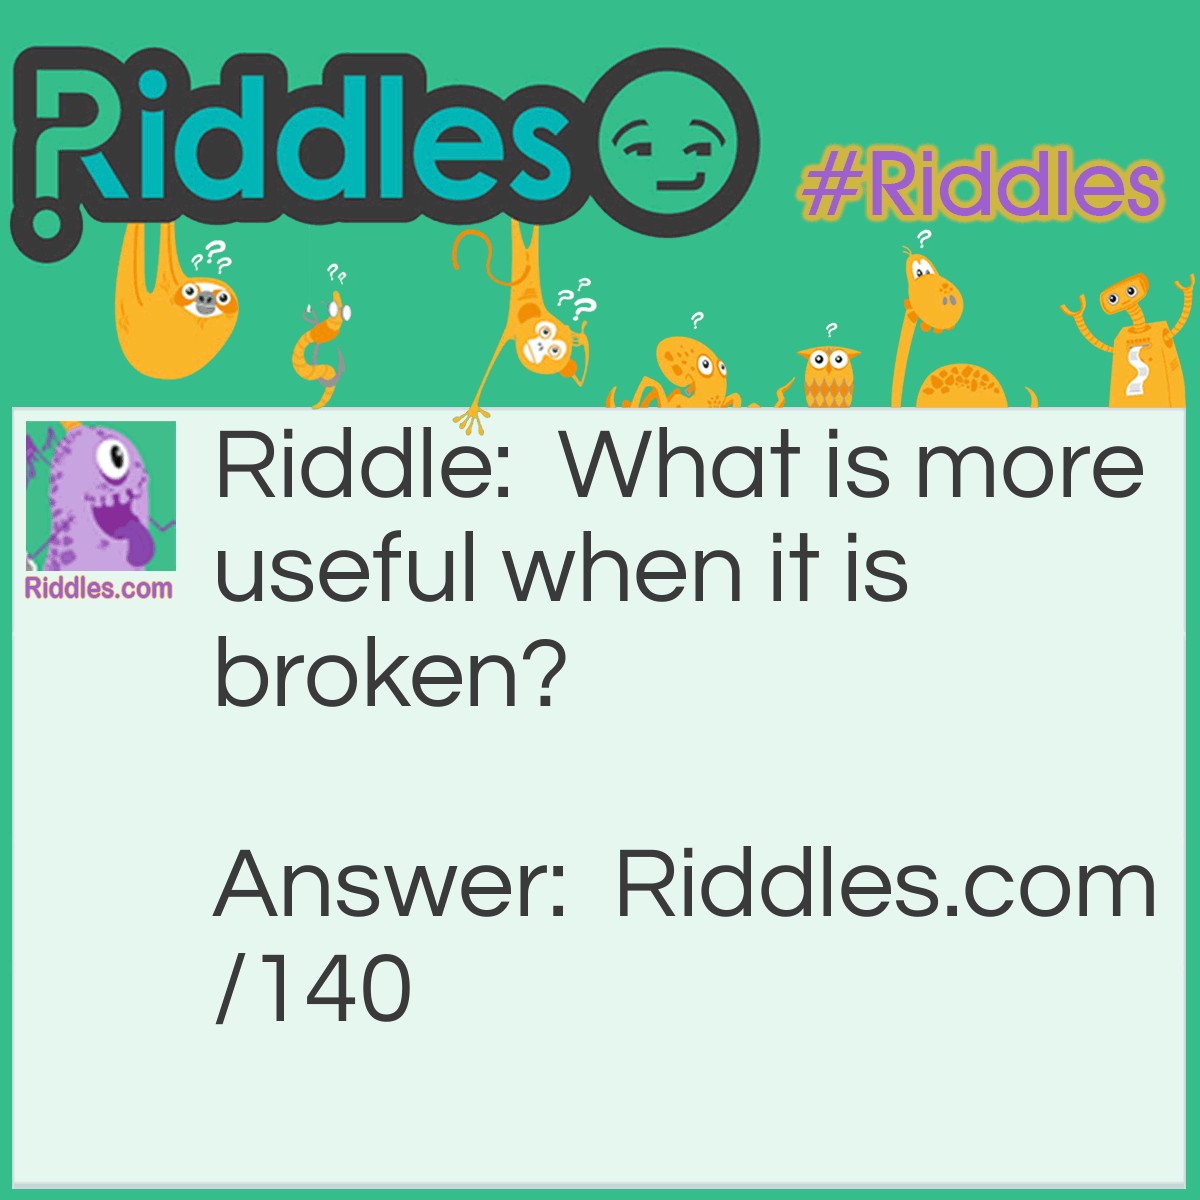 Riddle: What is more useful when it is broken? Answer: An egg.